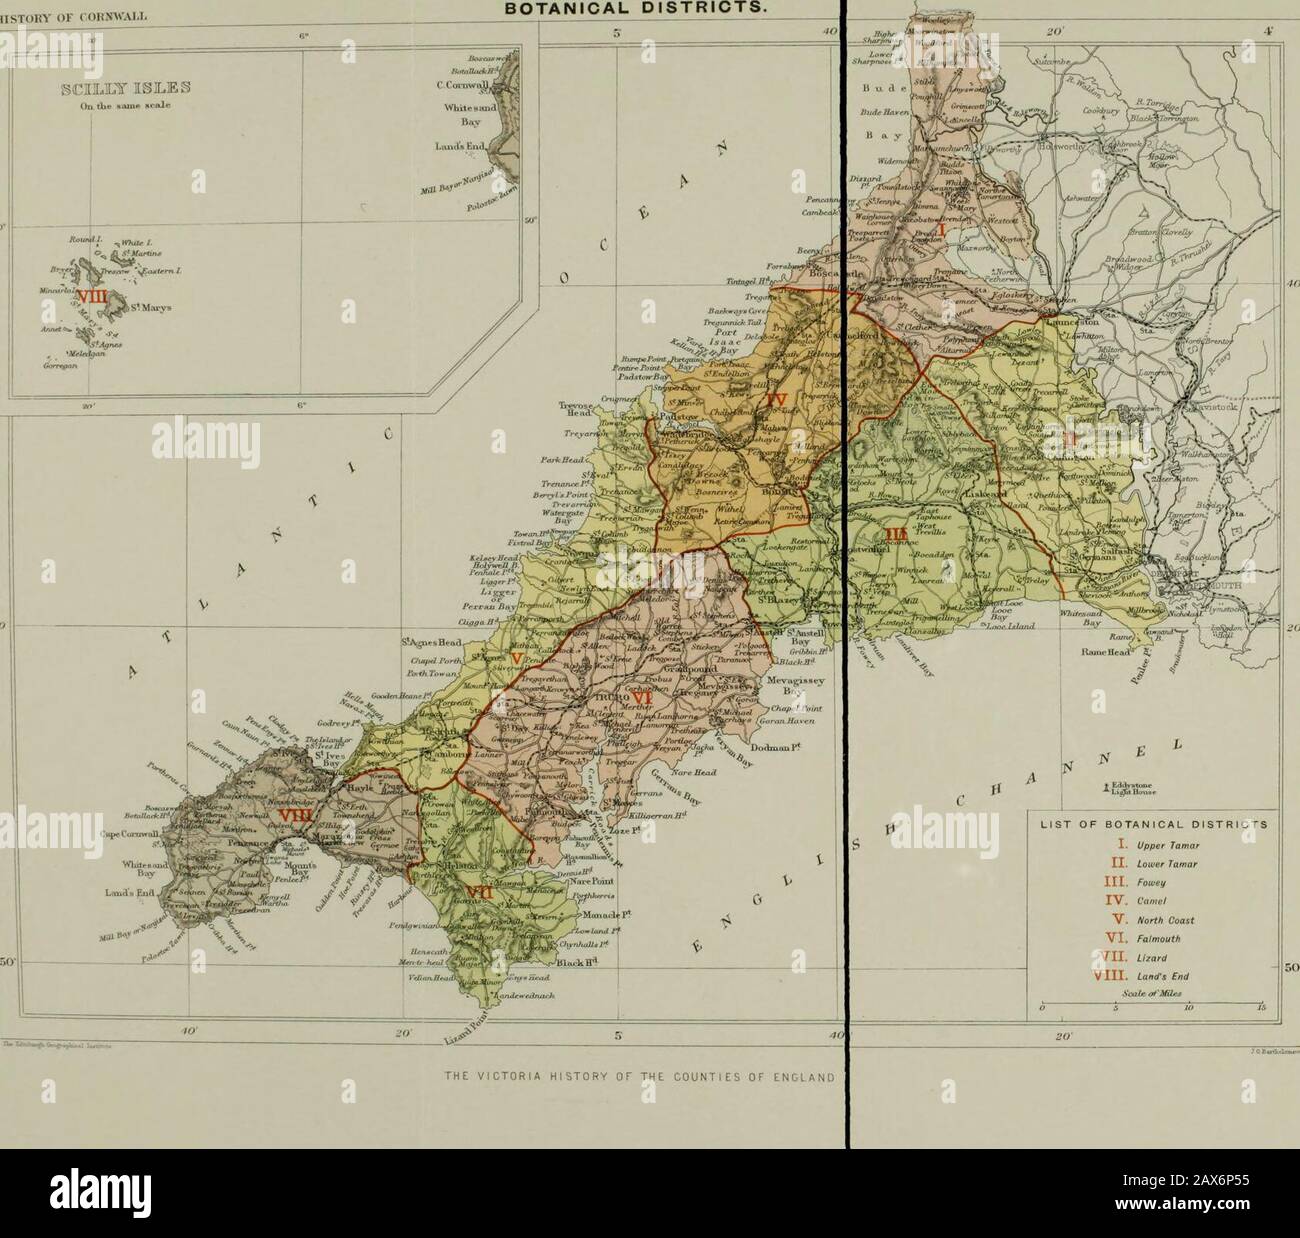 The Victoria history of the county of Cornwall . ^Whiu t. BatalLuiiB9C.CoilIWEL 40. dO J G Bar^oLnn* BOTANY A BRIEF glance at a map of Cornwall would prepare the averagefield botanist for a rich harvest. Favoured geographically, in-asmuch as they come within range of the genial operations ofthe Gulf Stream ; including a coast line which may be takenapproximately as 250 miles ; furnished with a chain of bold hillsforming a sort of backbone to the county ; and including among otheradvantages densely wooded and well watered valleys opening to the sea onboth the north and the south coast, a good Stock Photo